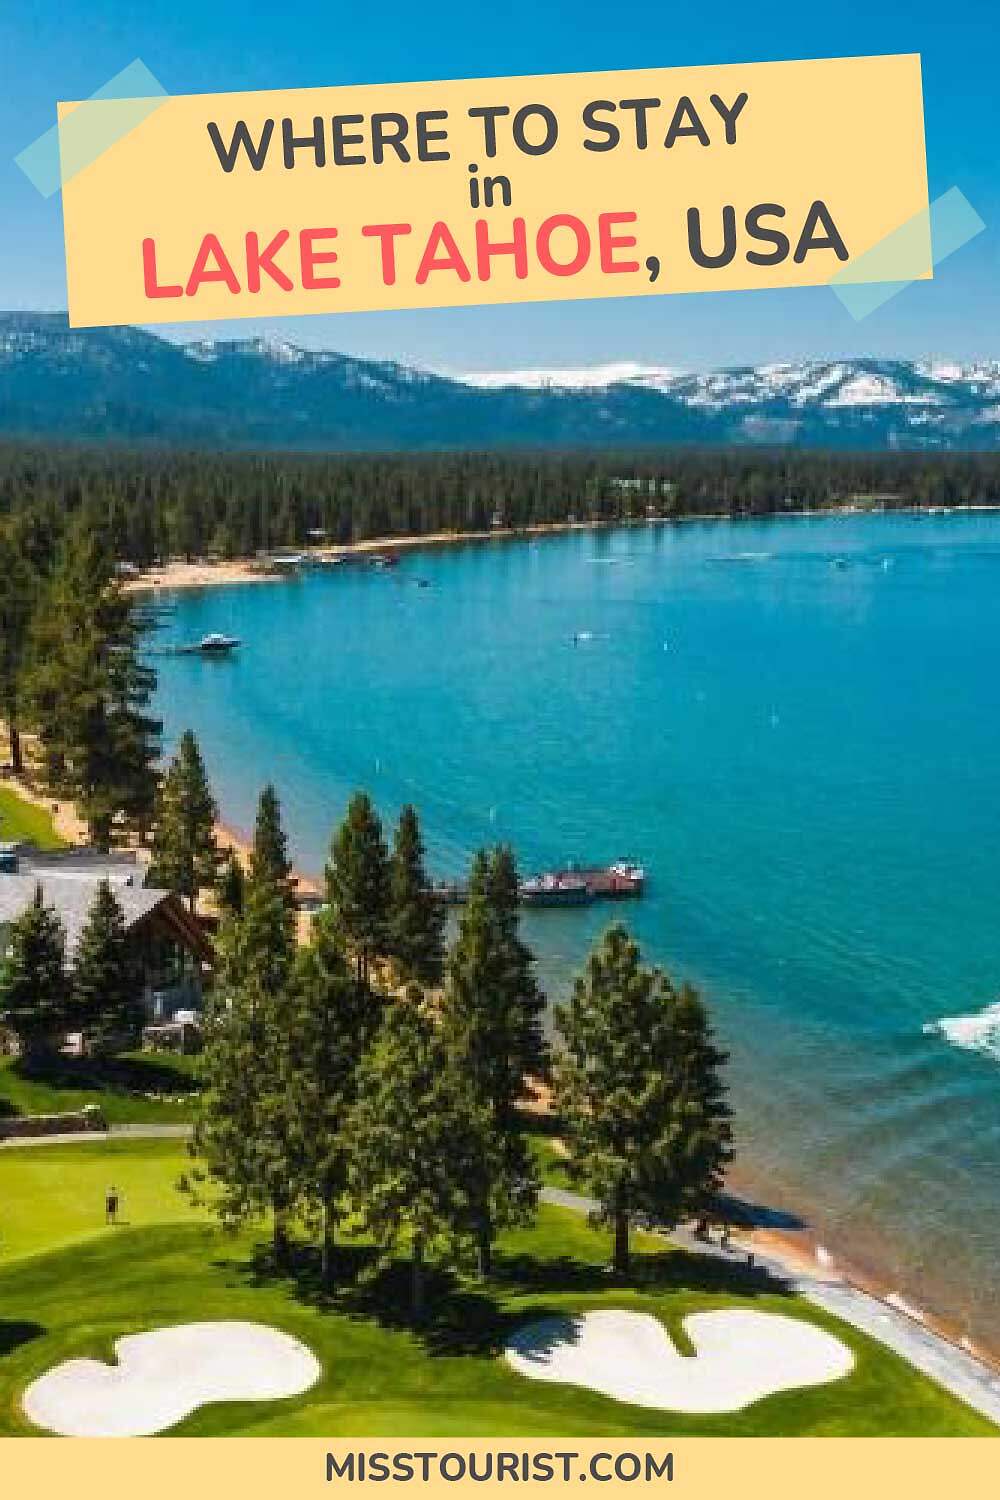 Lake Tahoe lodging with a clear view of the lake, surrounding trees